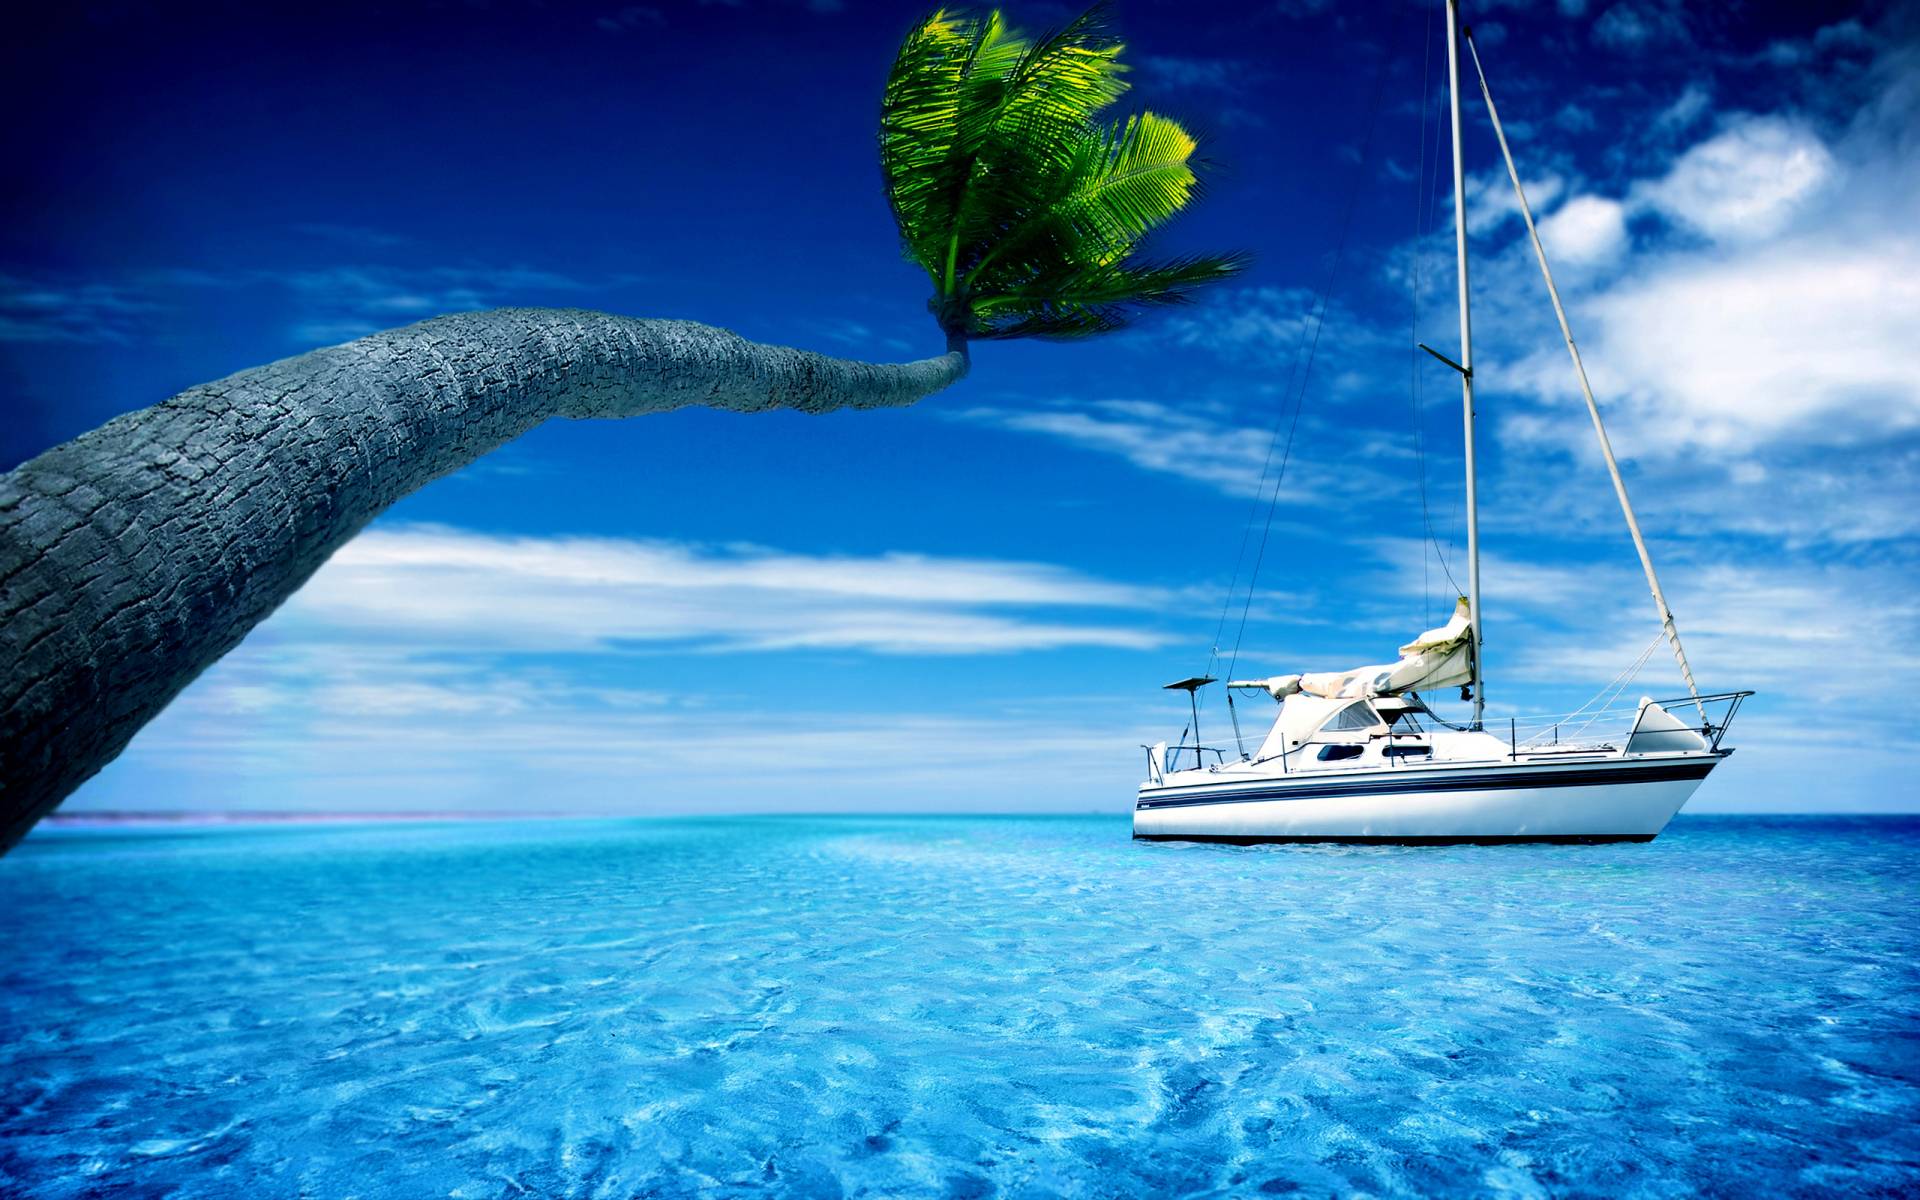 Palm Tree and Yacht widescreen wallpaper. Wide